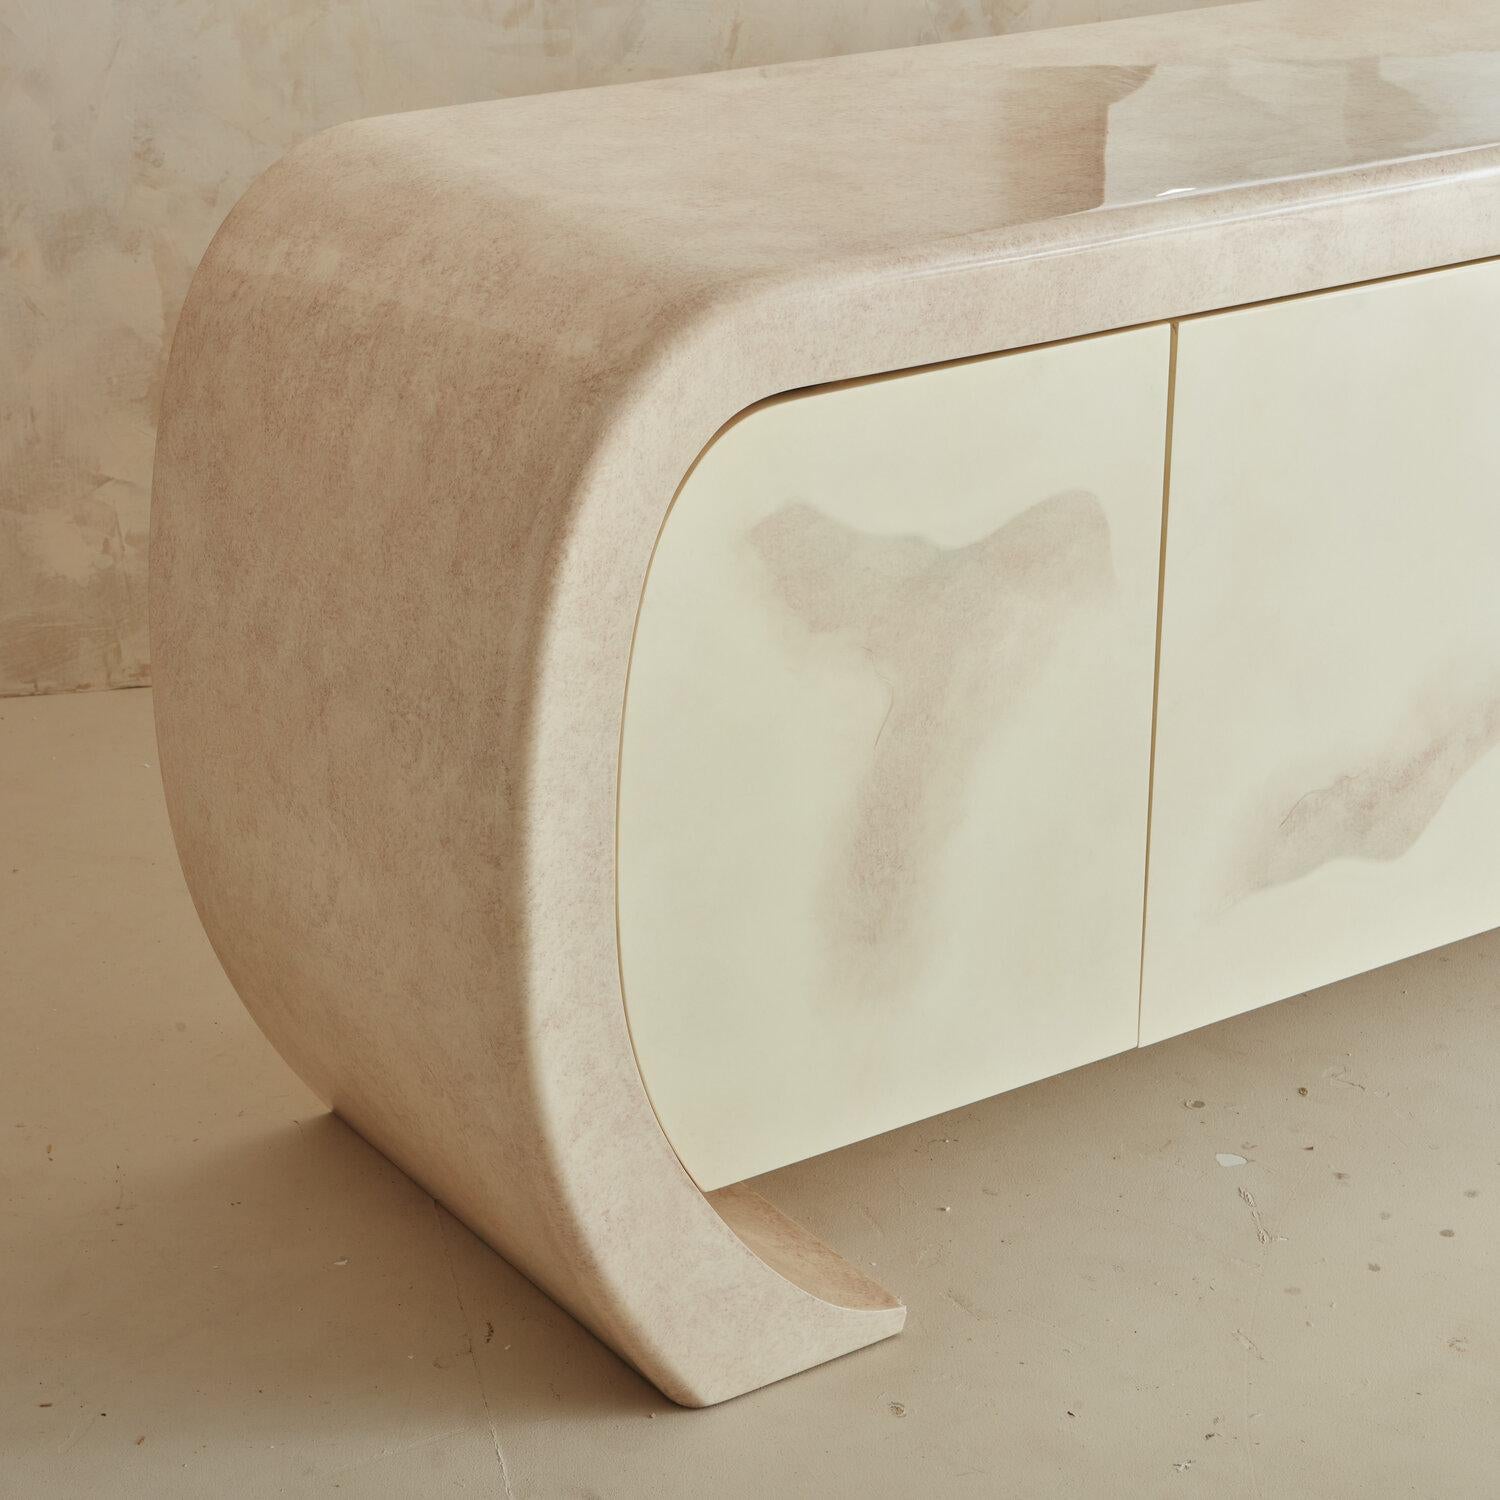 Late 20th Century Post Modern Curved Credenza in Ivory Faux Parchment Finish, 1980s